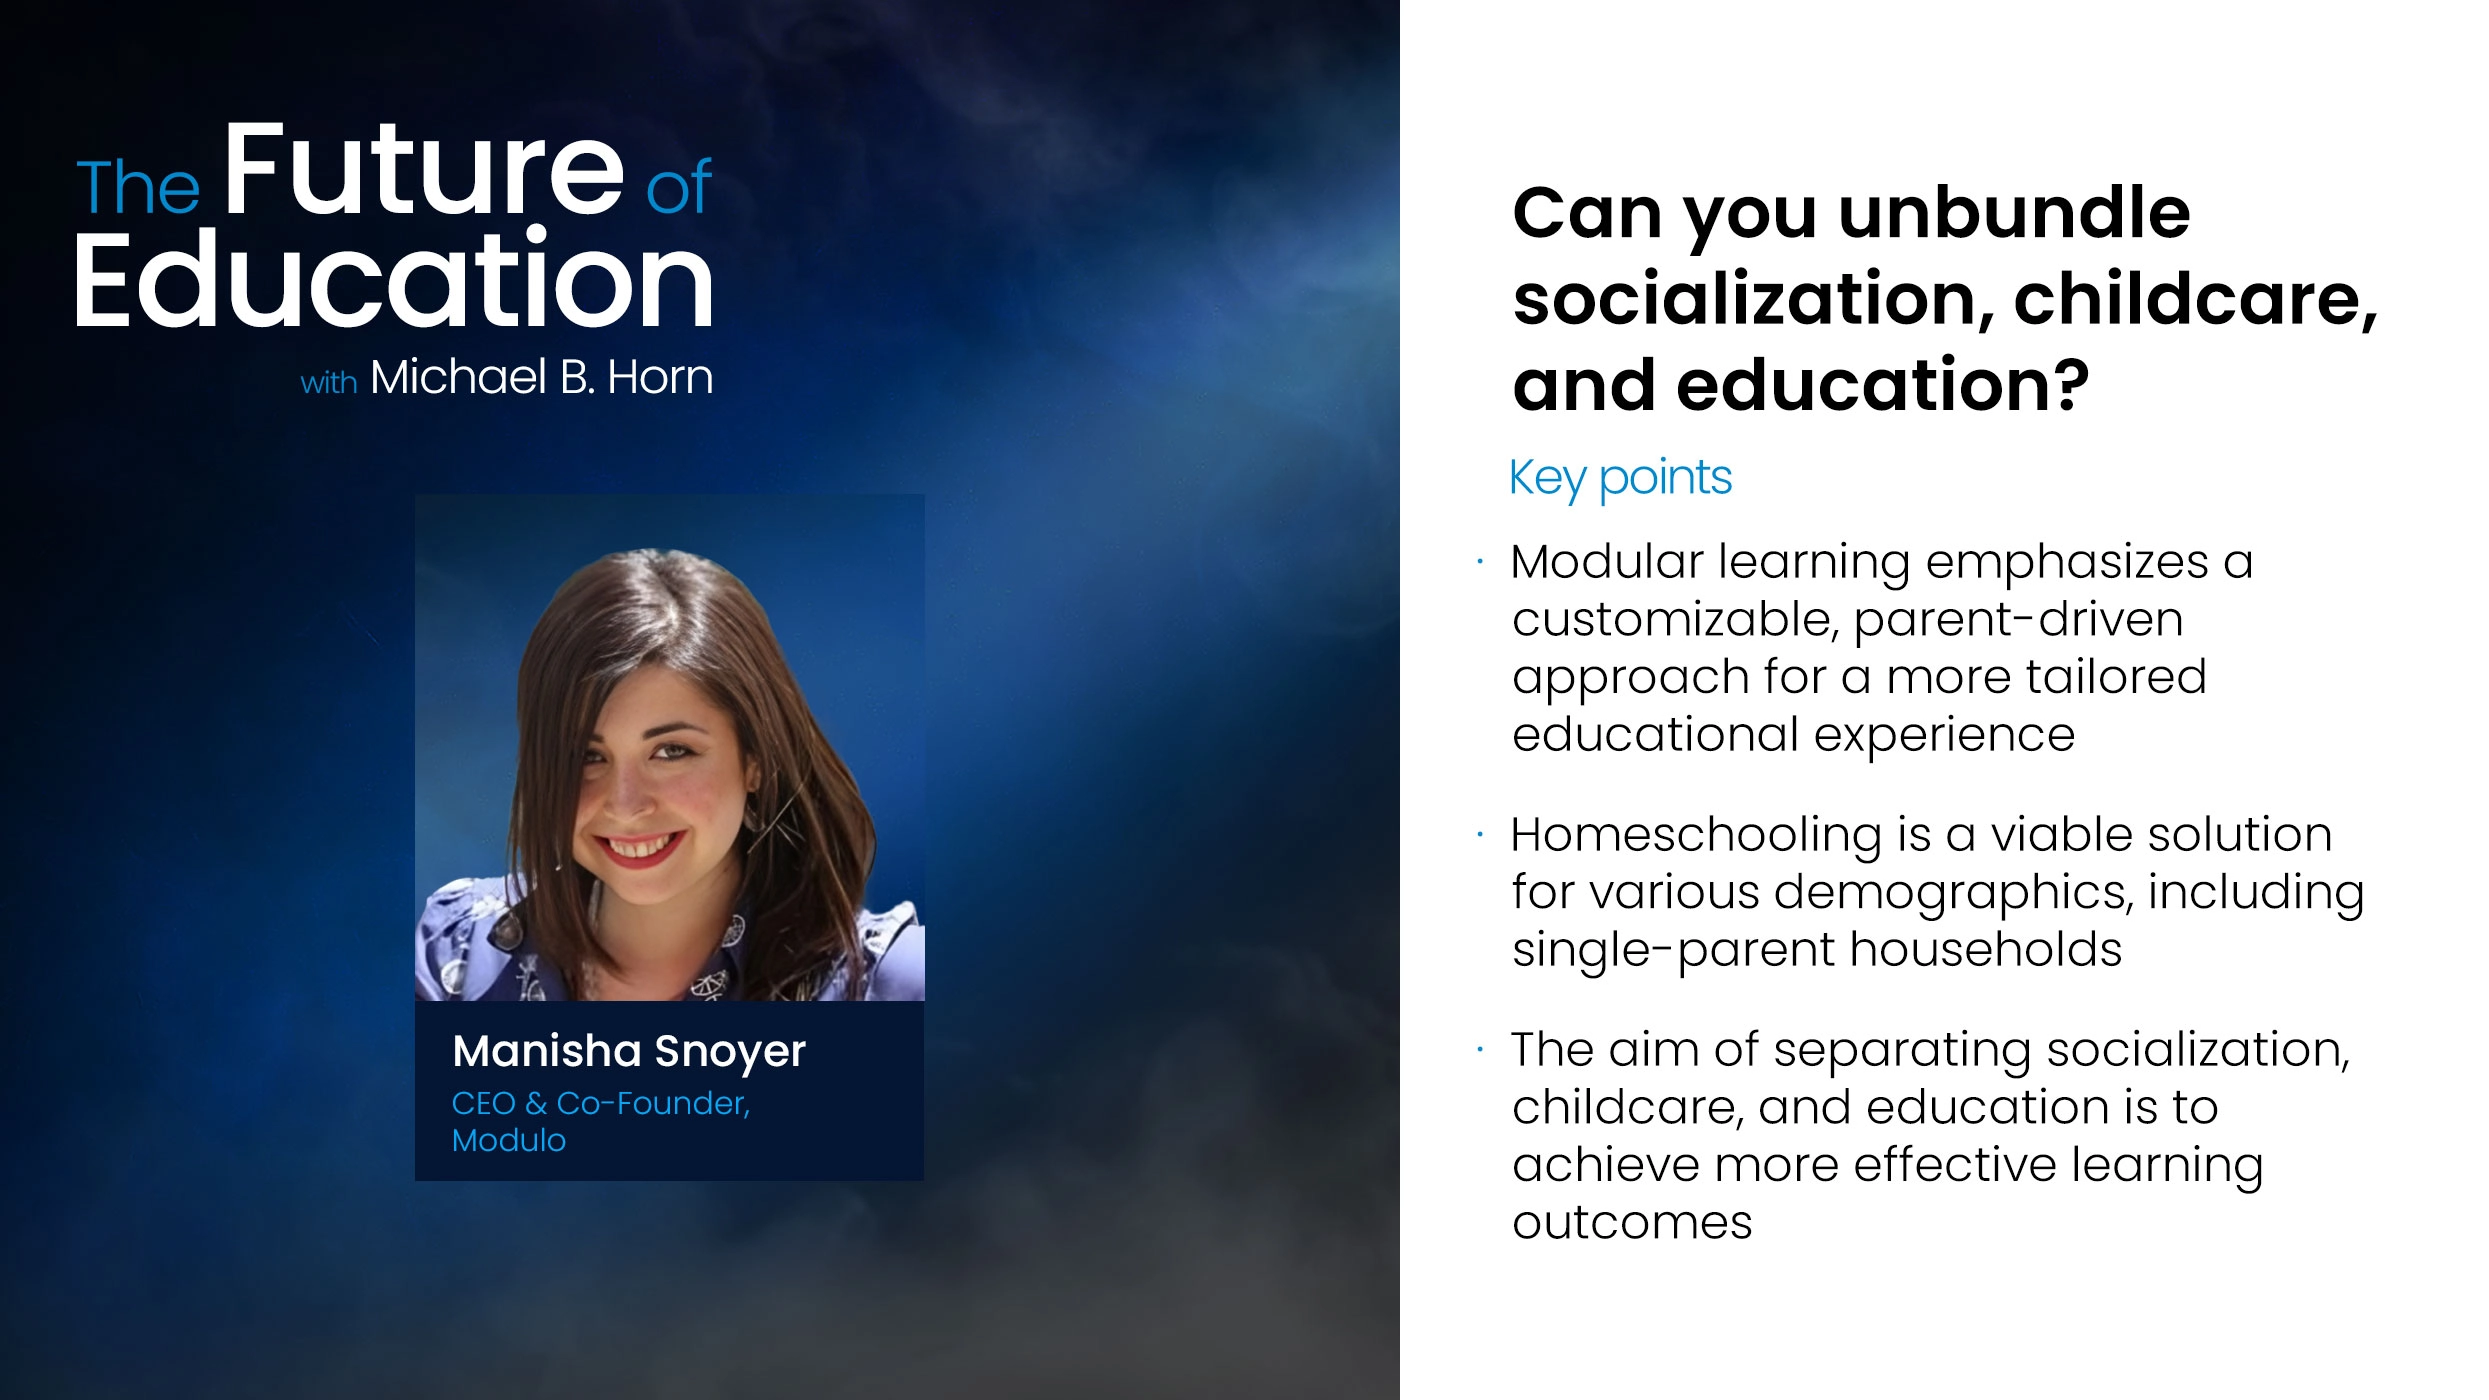 Can You Unbundle Socialization, Childcare, and Education?